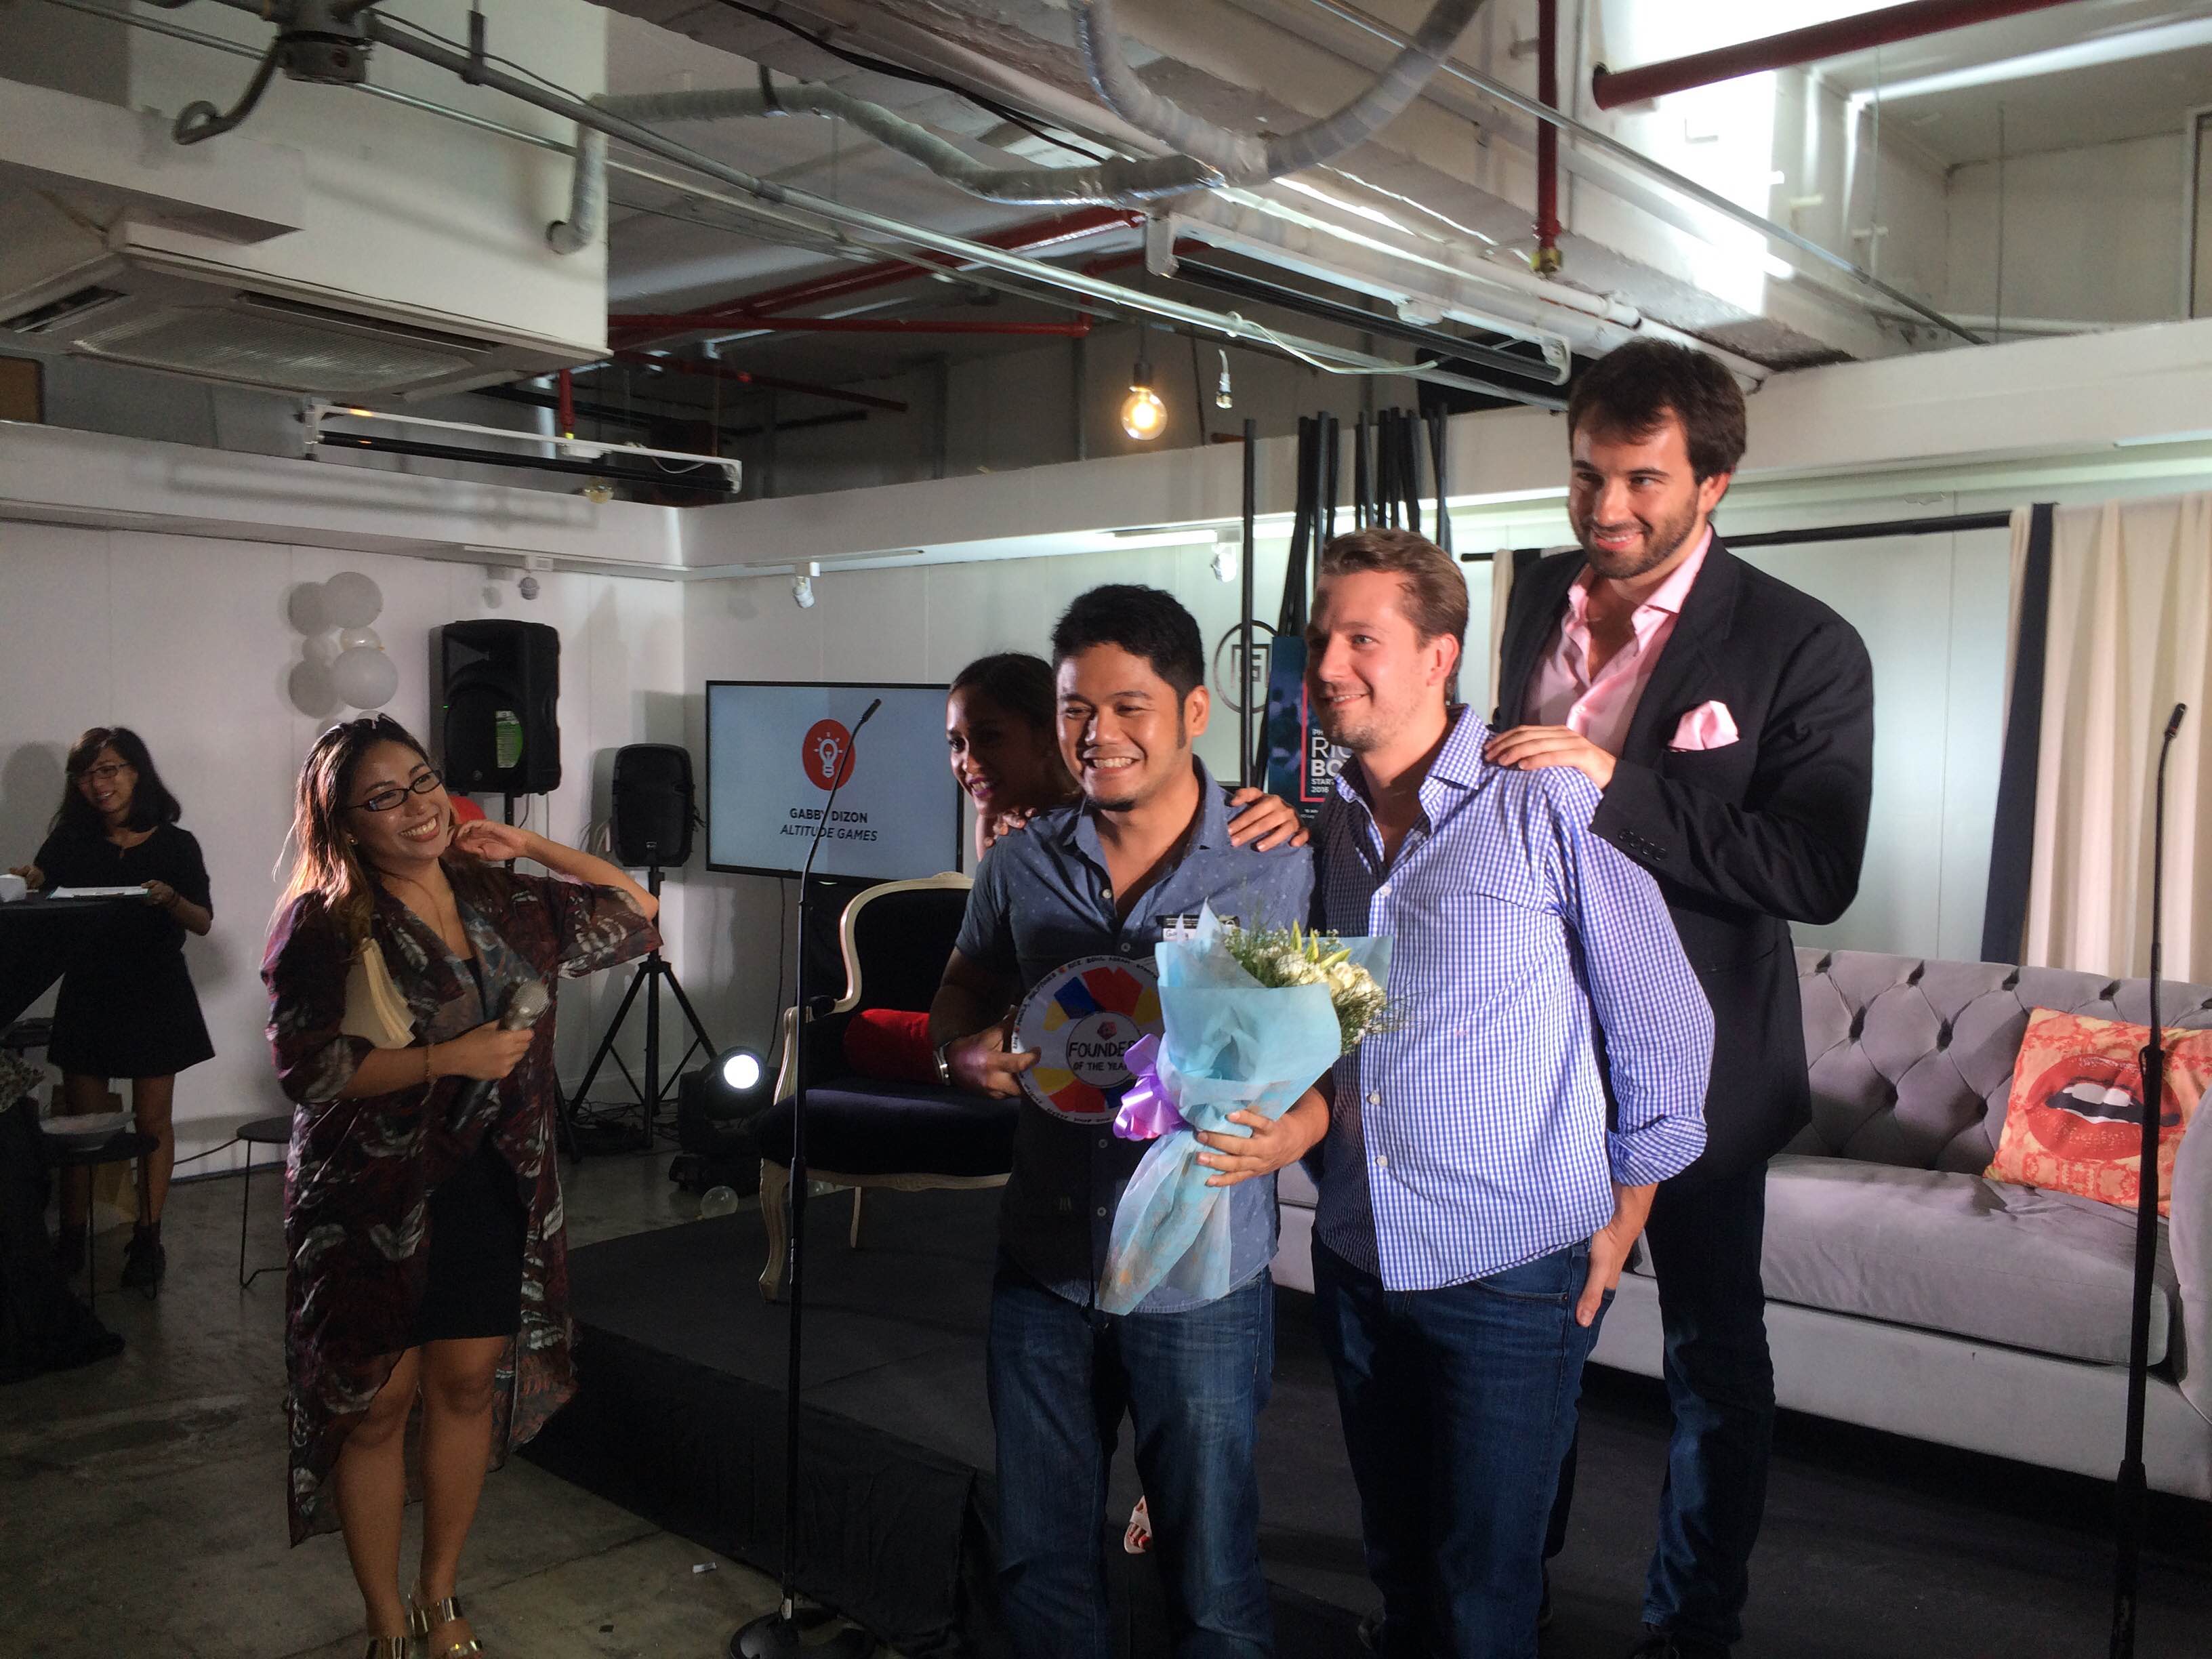 CAMARADARIE. Zipmatch's Chow Paredes (2nd from left) Pawnhero's David Margendorff and Flyspaces' Mario Berta celebrate with Altitude Games founder Gabby Dizon (holding flowers) as he wins the startup founder of the year award at the 2016 Rice Bowl Startup Awards on July 15. All Photos by Chris Schnabel/Rappler  